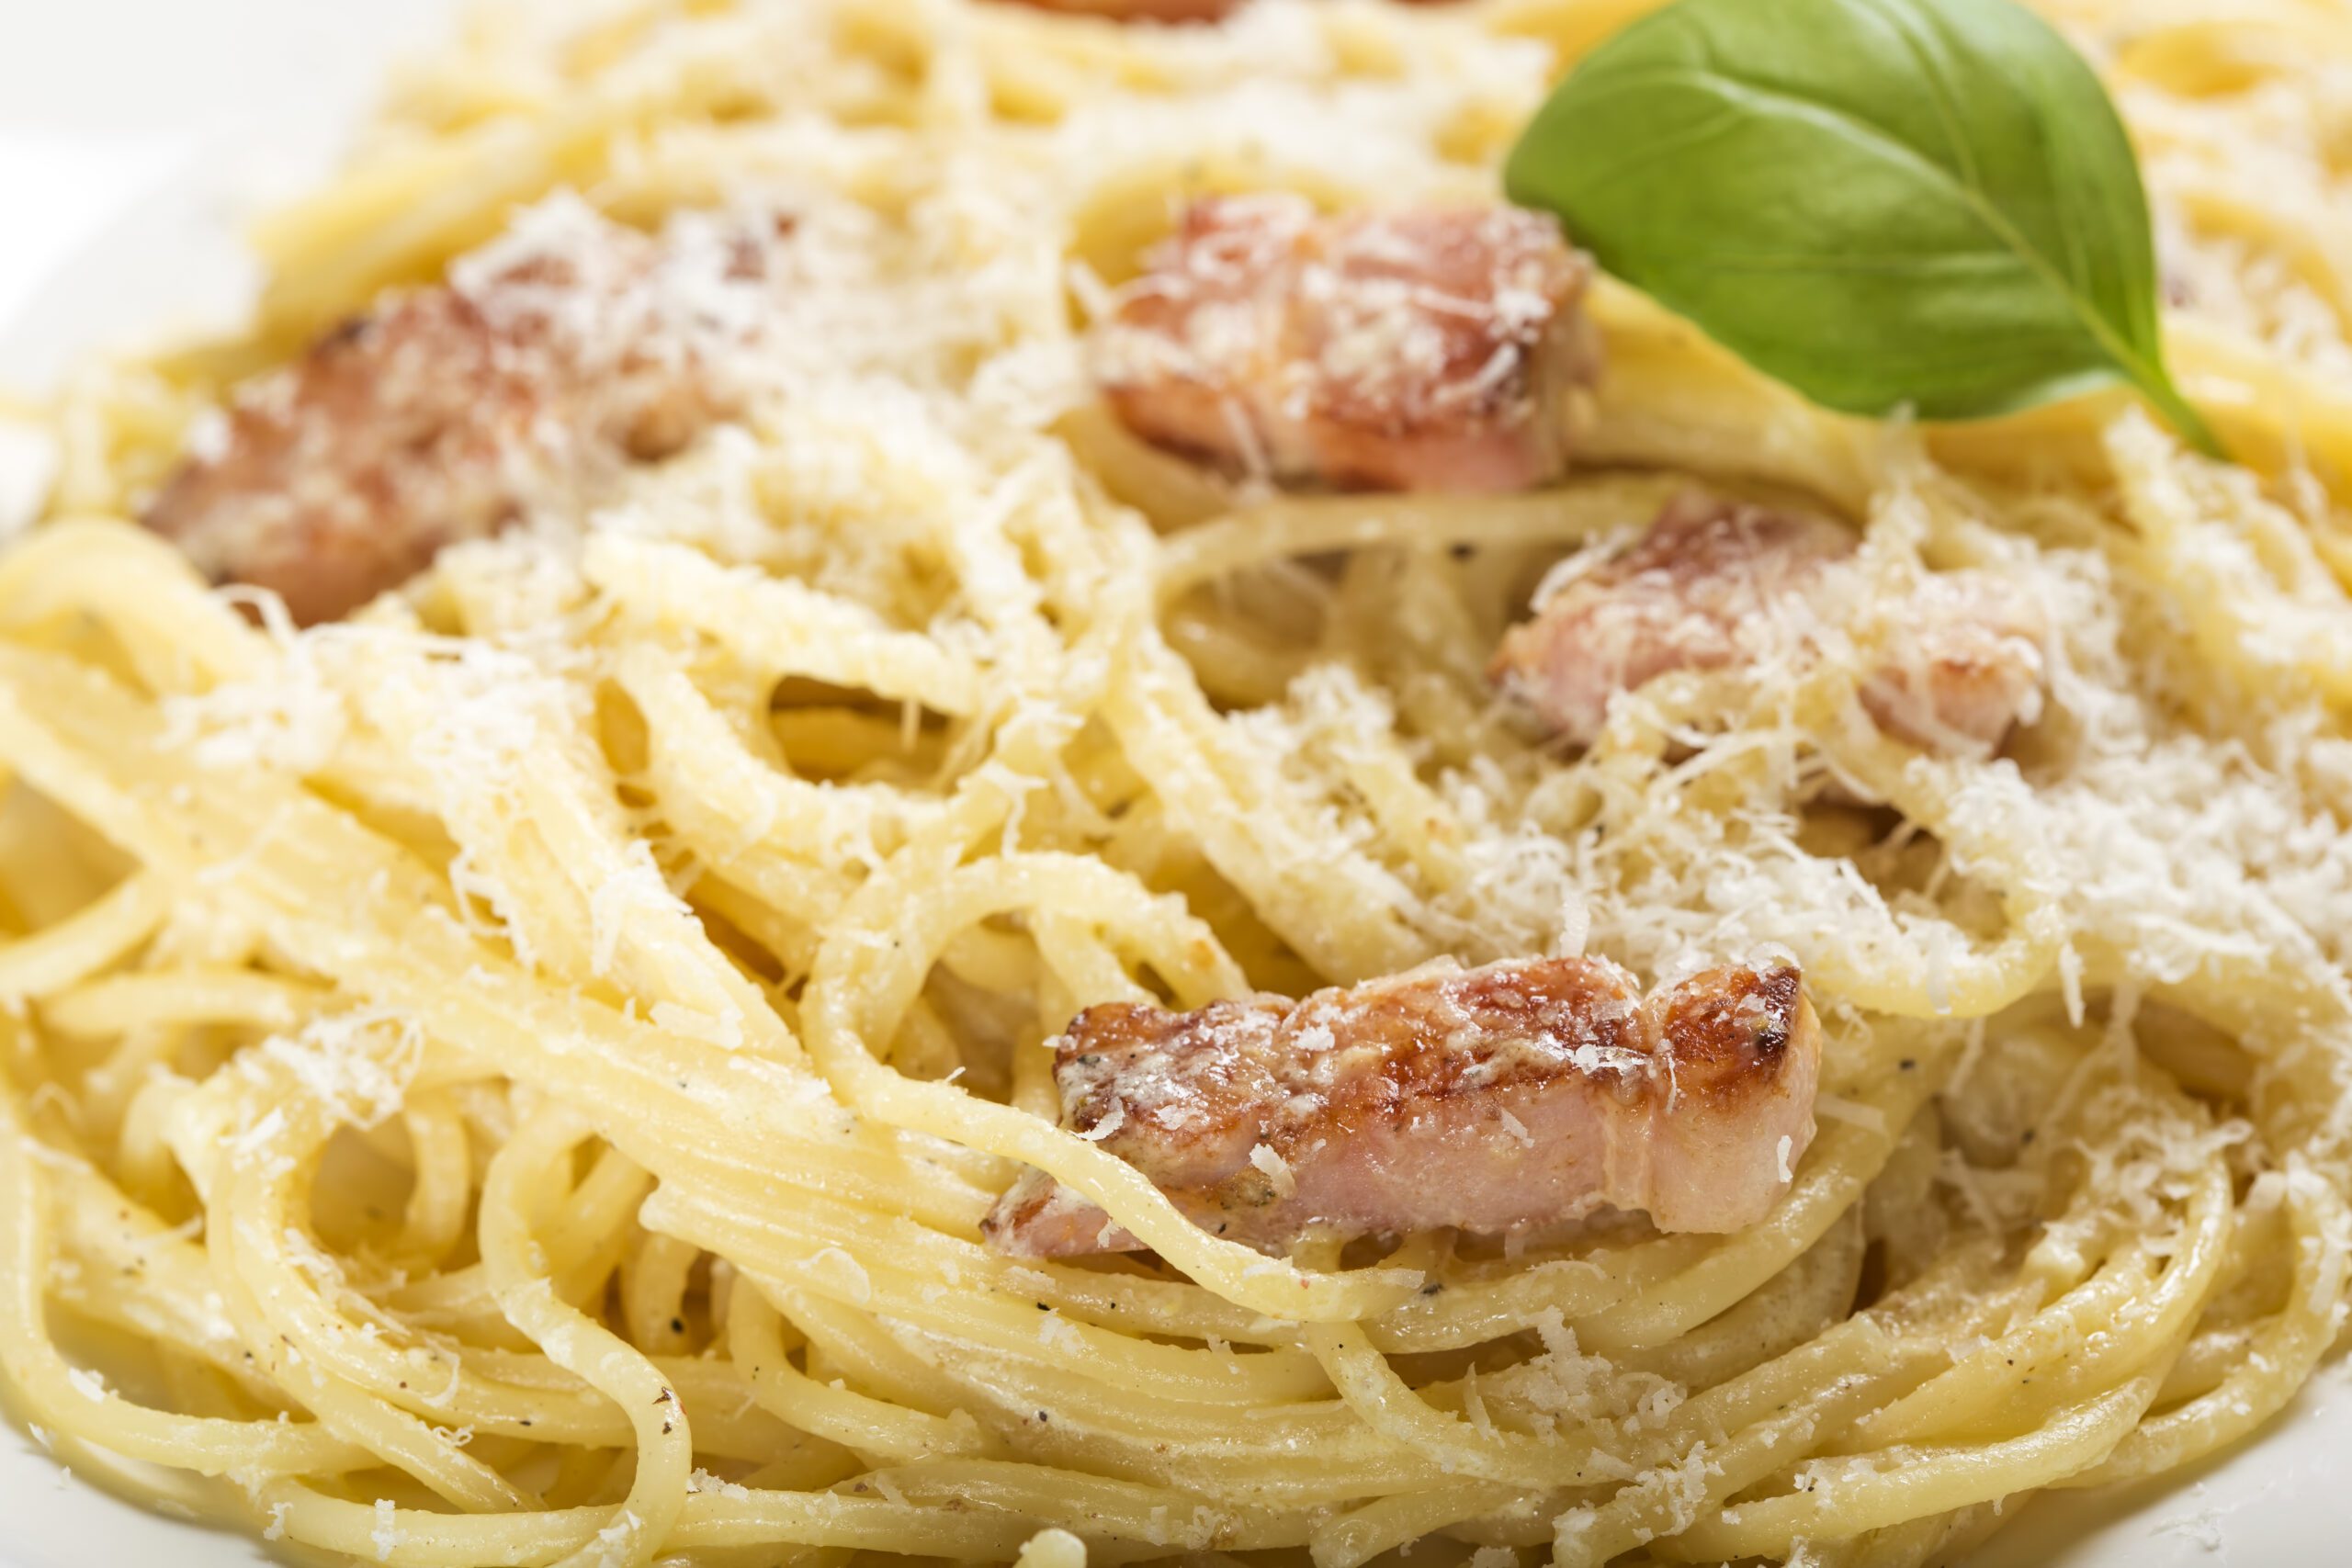 Plate with traditional Italian pasta Carbonara with grated Parmesan and basil